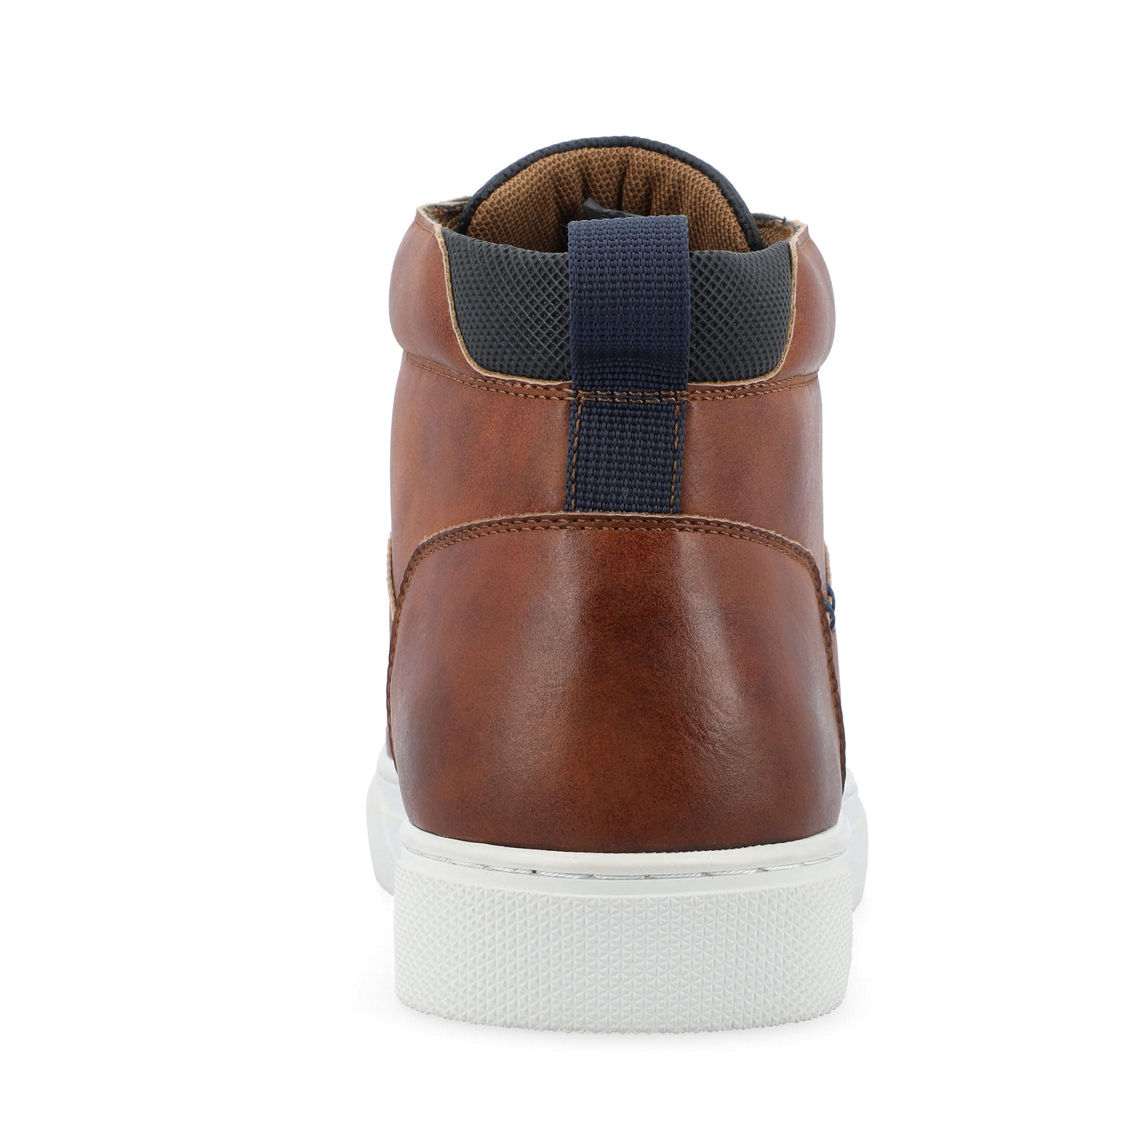 Vance Co. Ortiz Lace-up High Top Sneaker - Image 3 of 5